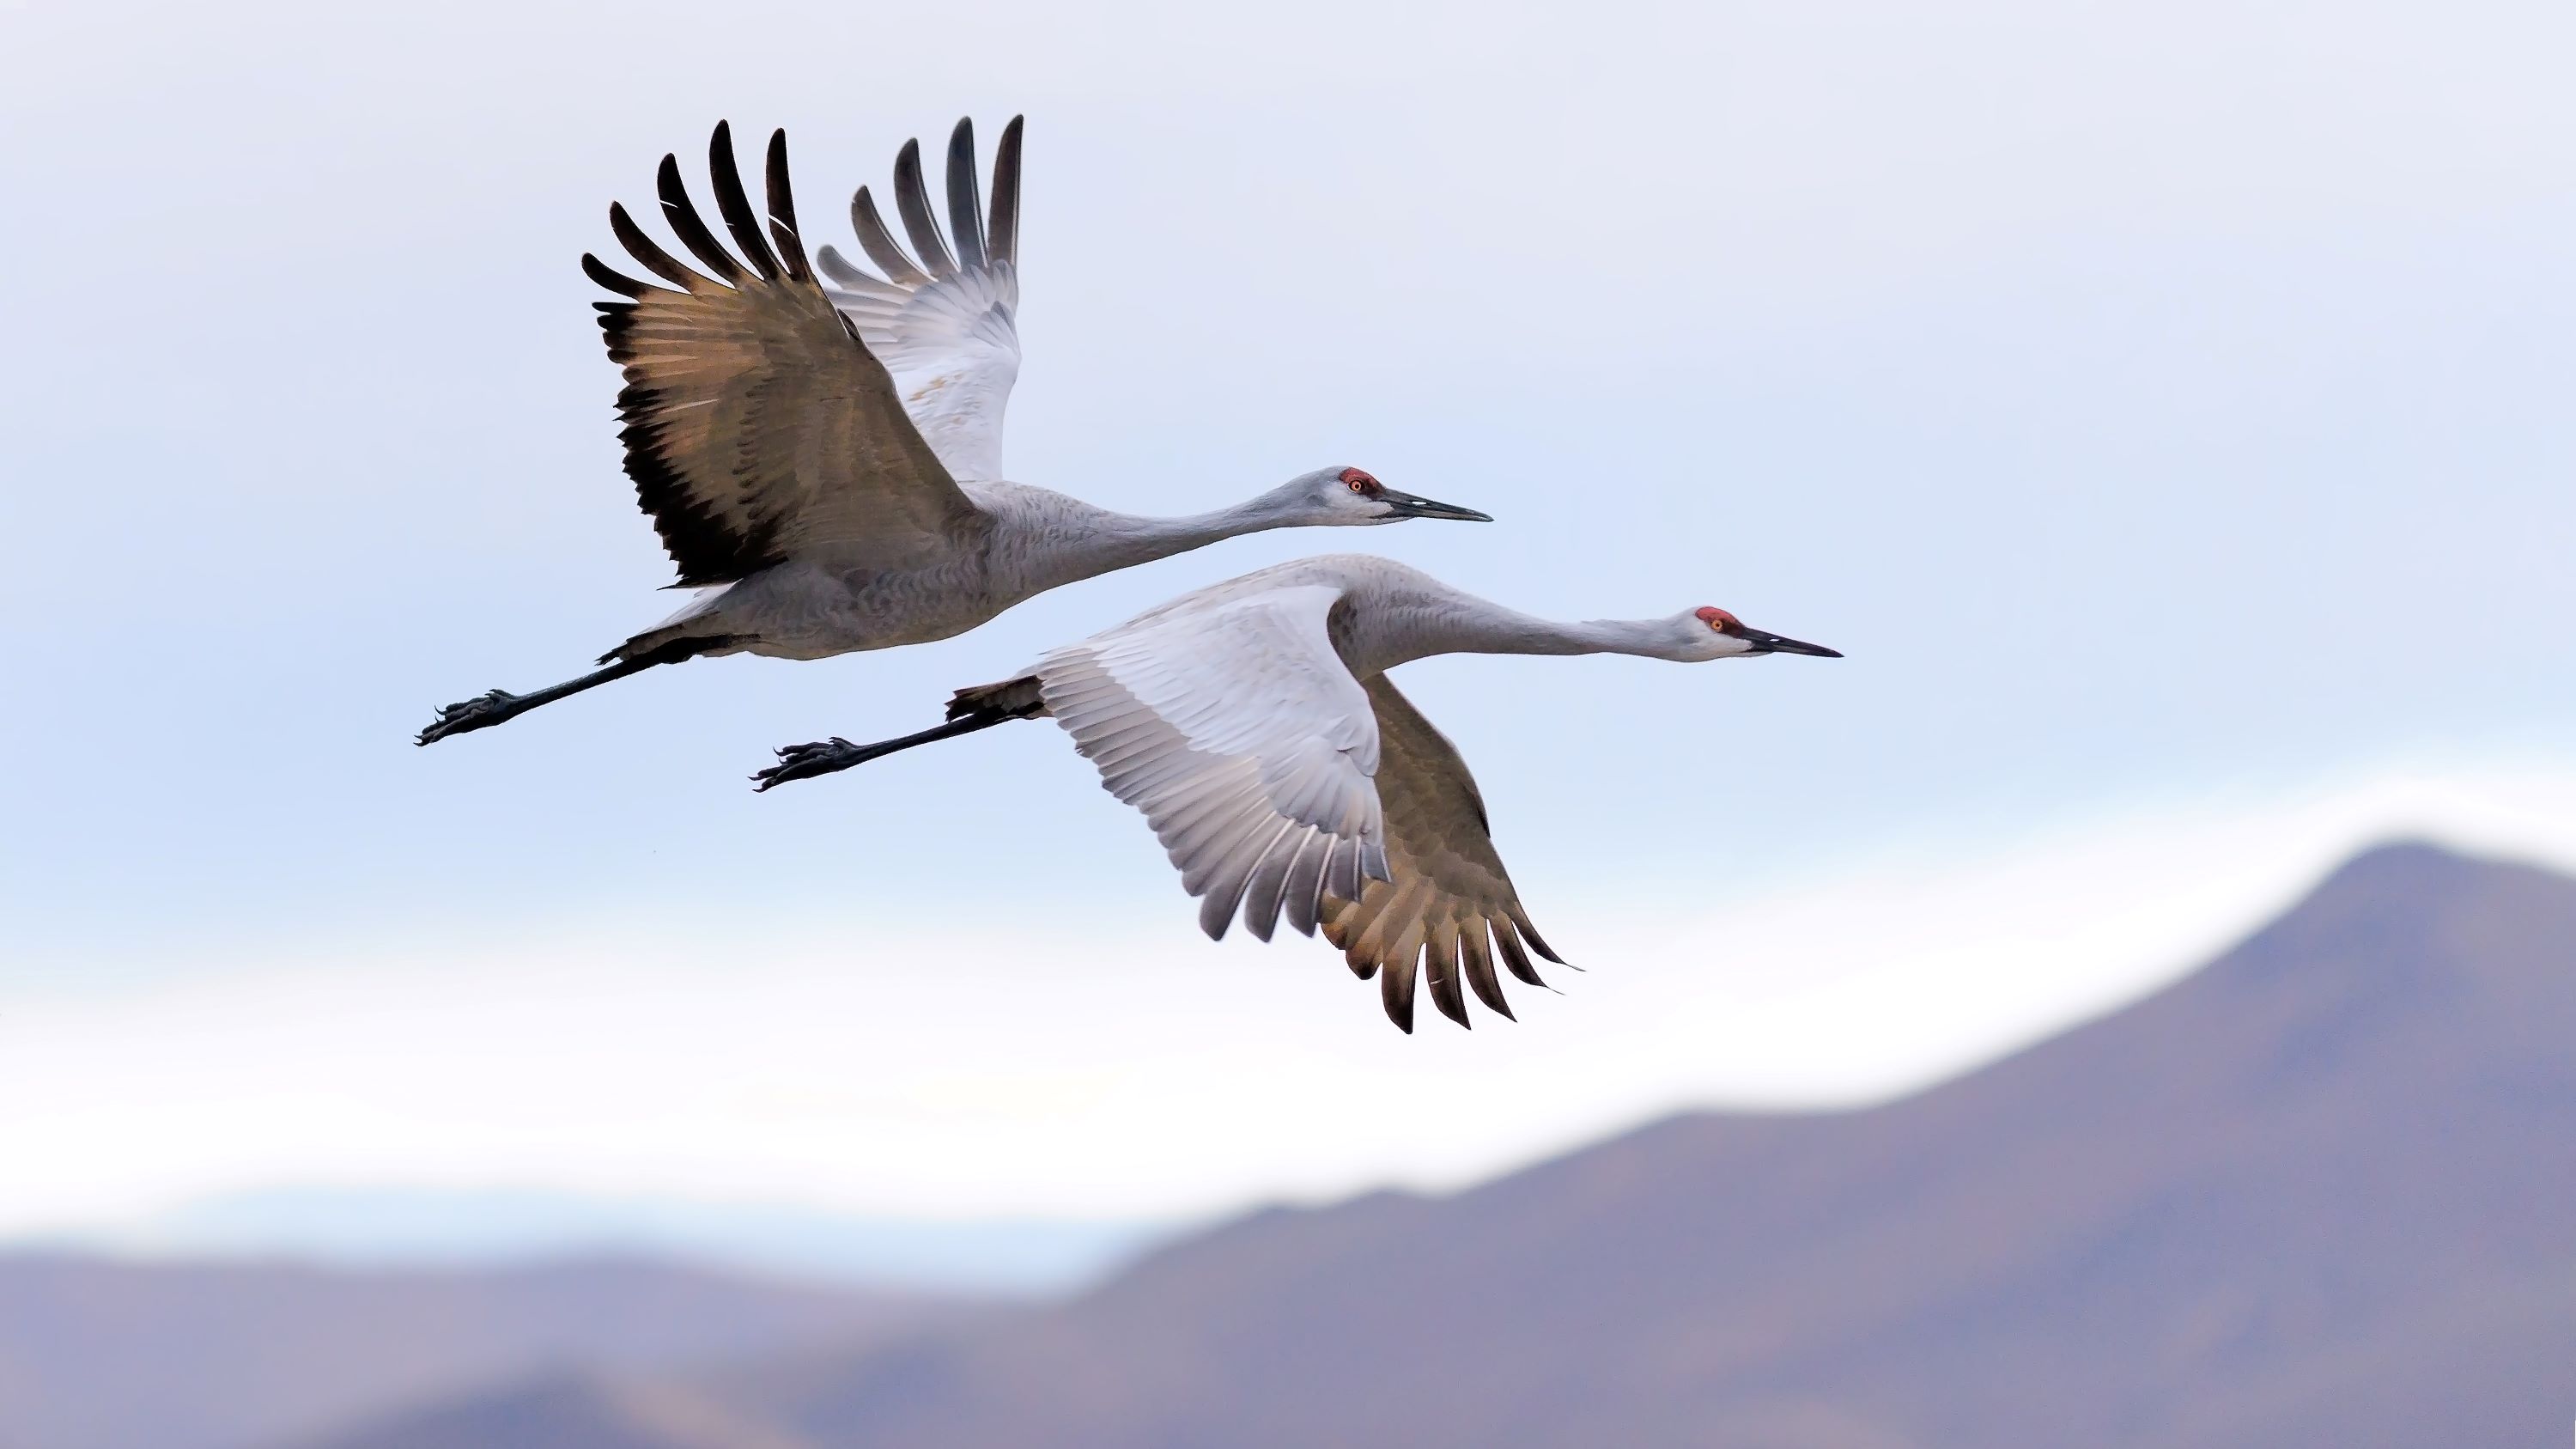 A pair of Sandhill Cranes flying.